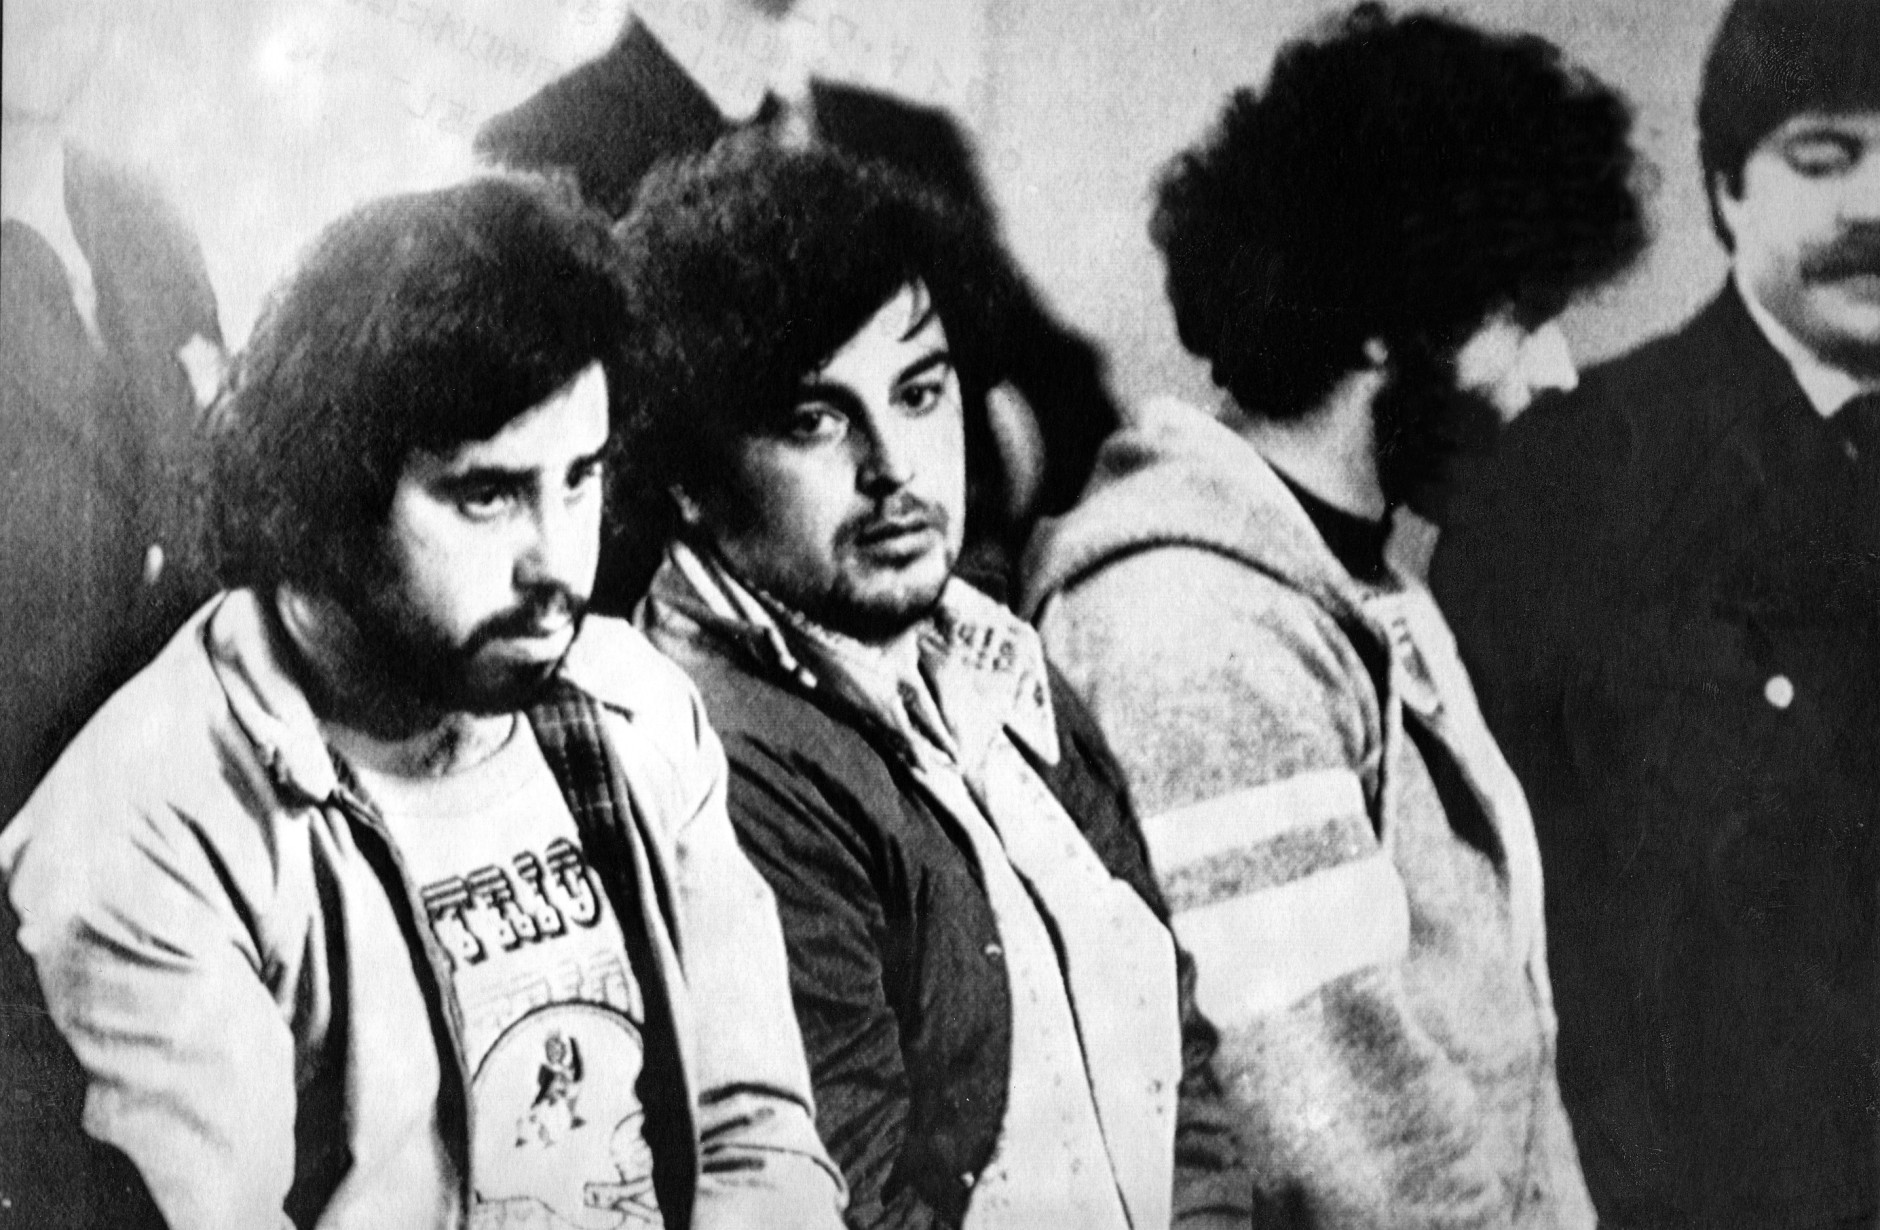 Gang rape suspects Daniel G. Silvia, left, Jose Vieira, center, and John Cordeiro were jailed last March for the rape of a New Bedford, Mass., woman. After 10 months of delay and legal maneuvering, the trial, Feb. 3, 1984, is about to begin in the Big Dan's rape case. (This is a 1983 file photo)